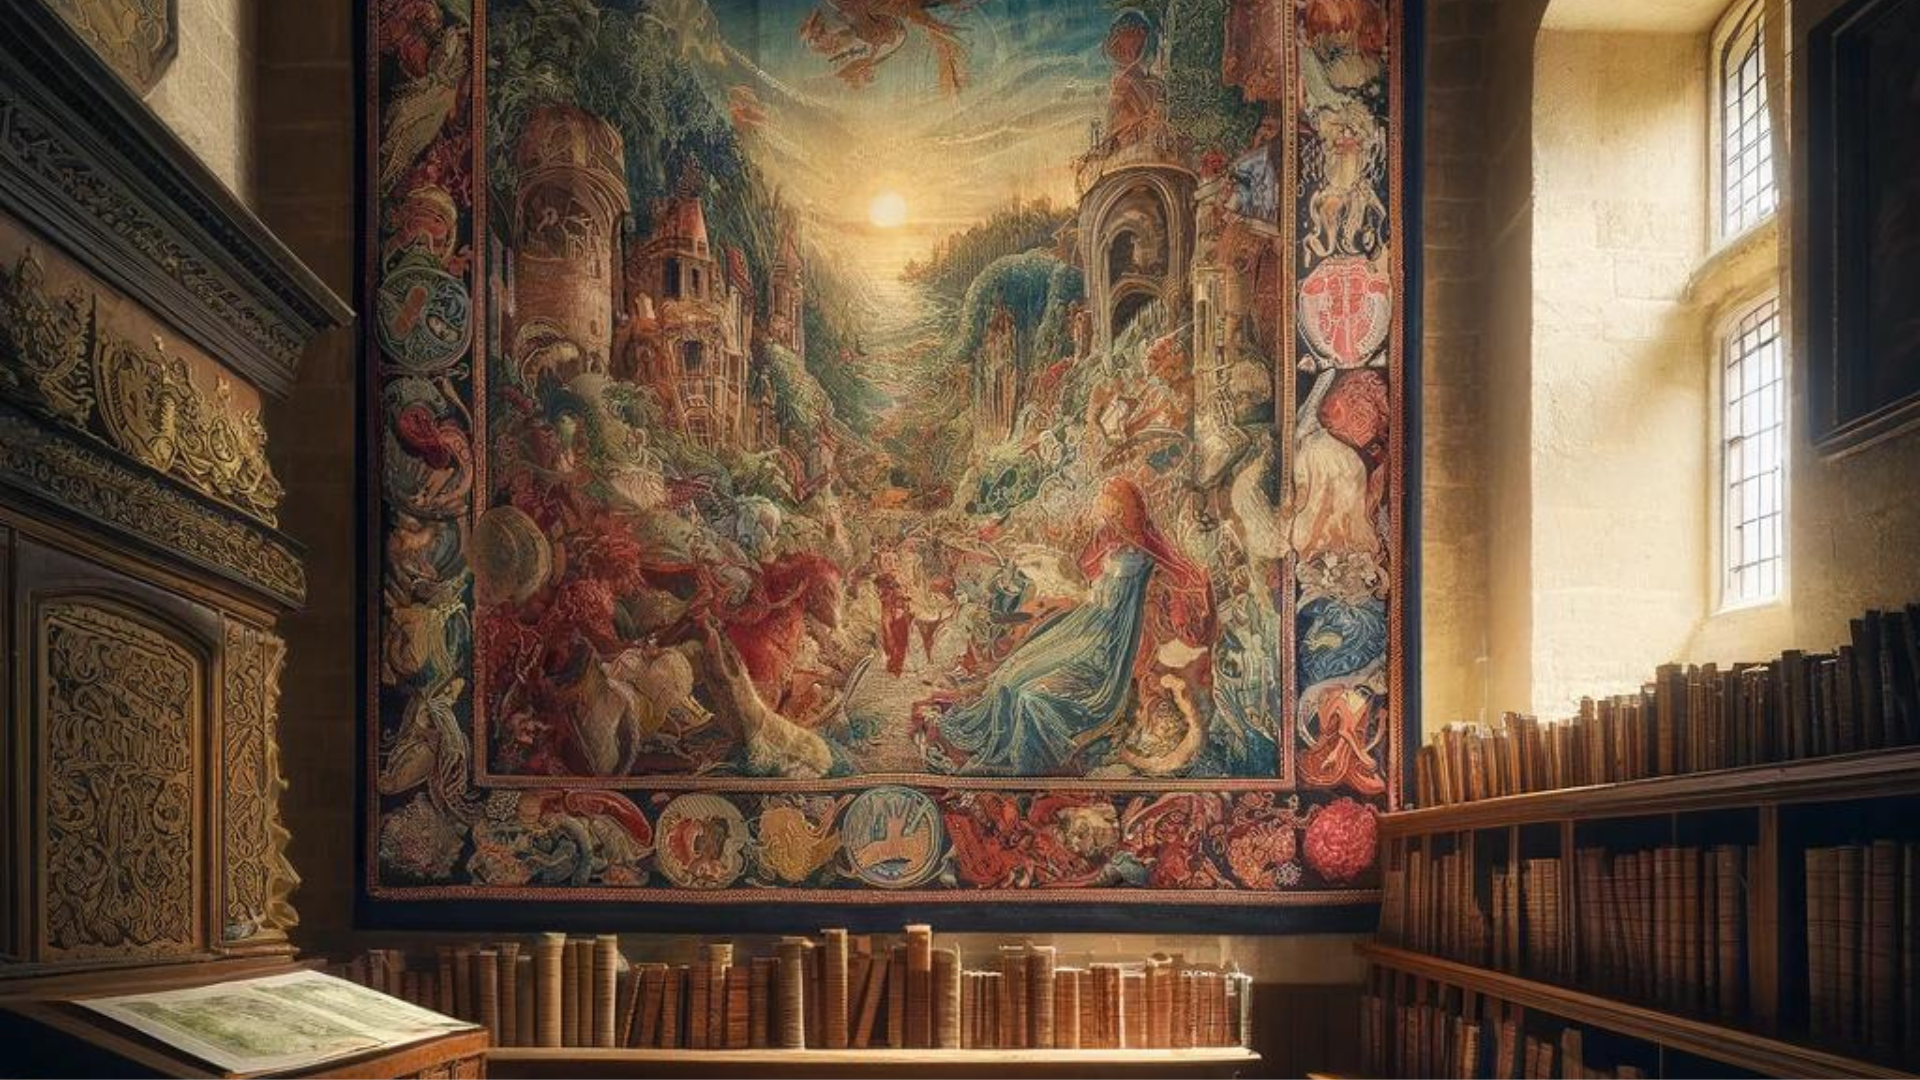 A large, colorful tapestry depicting an epic tale hangs on the wall of a cozy, medieval library reading nook, surrounded by shelves of ancient books, with soft light illuminating the scene.